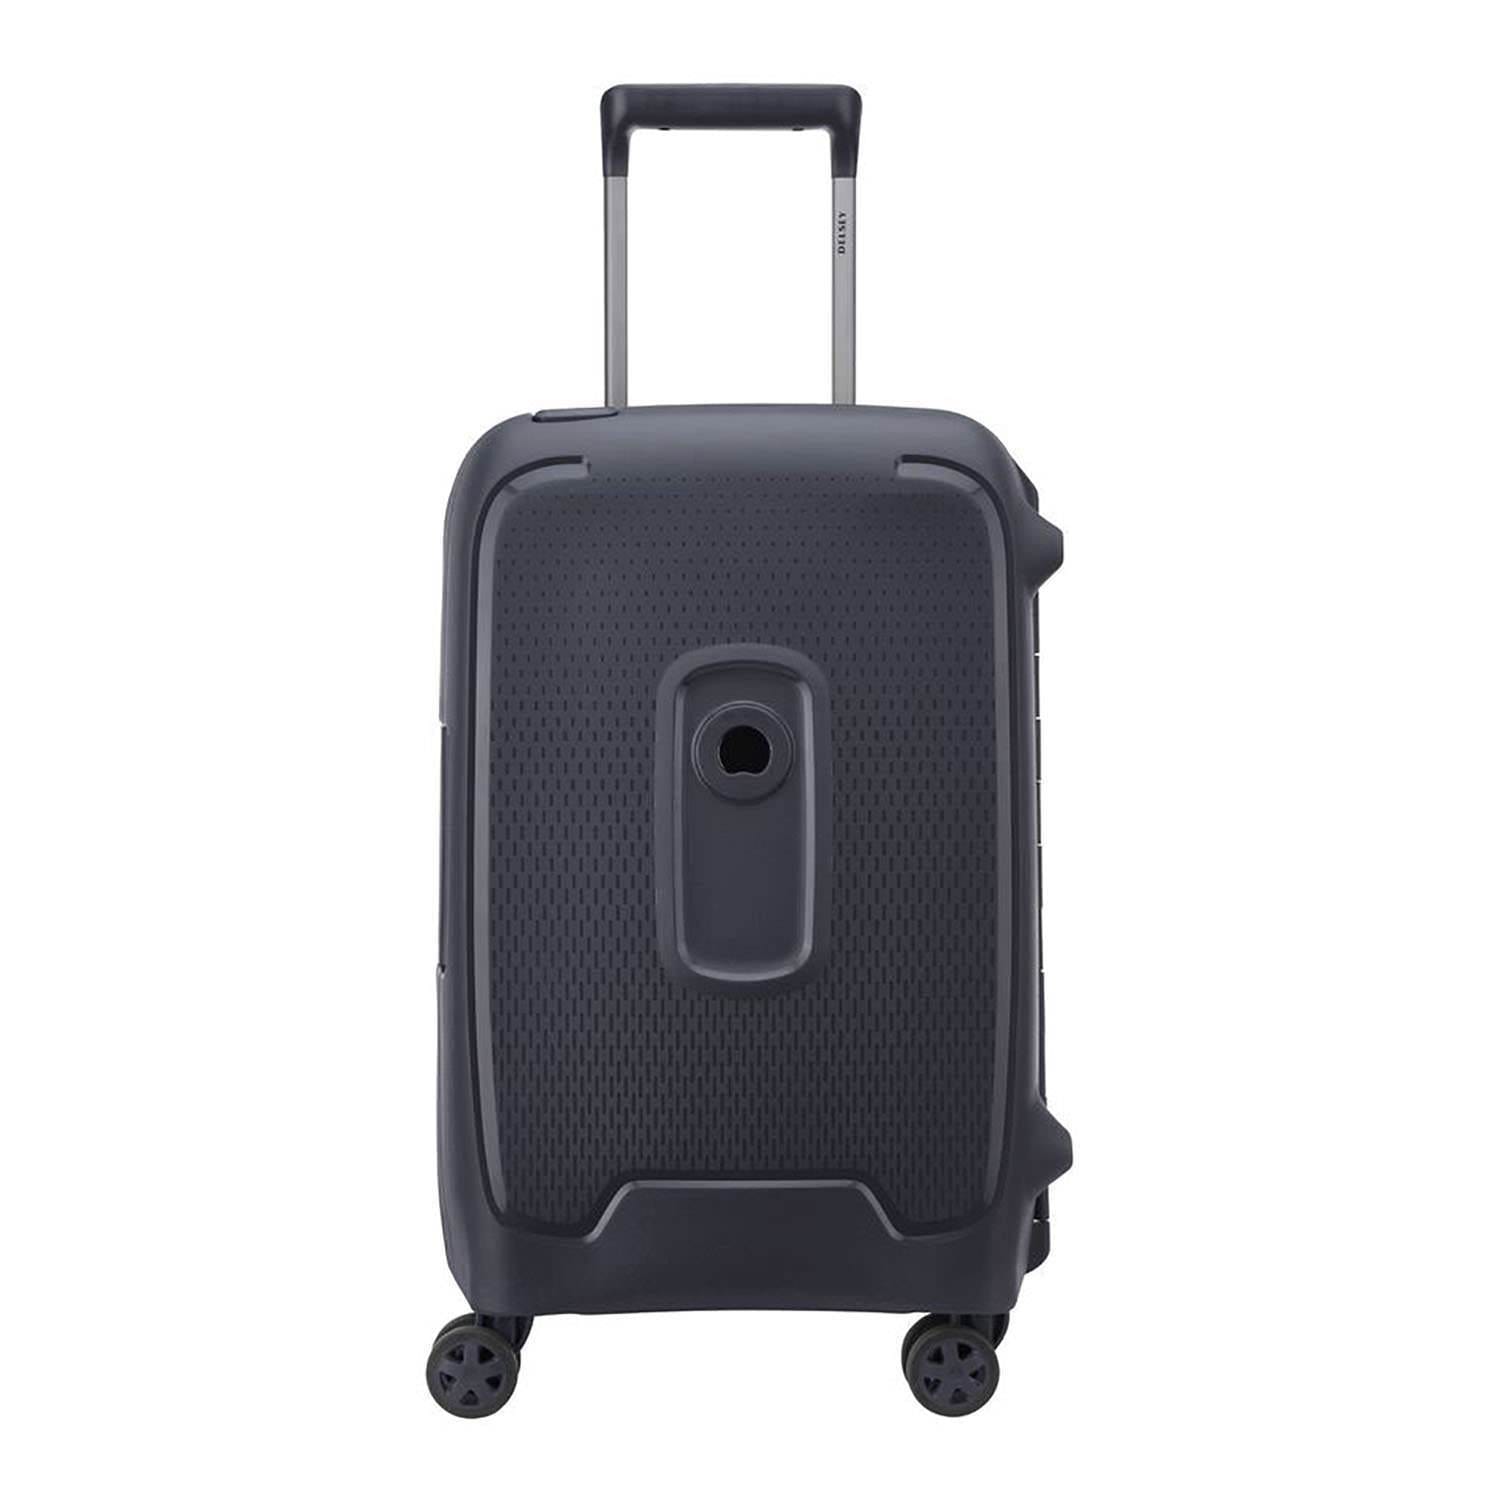 Delsey Moncey 4 Double Wheel Cabin Trolley Case - Anthracite - 00384480101 ANT - Jashanmal Home